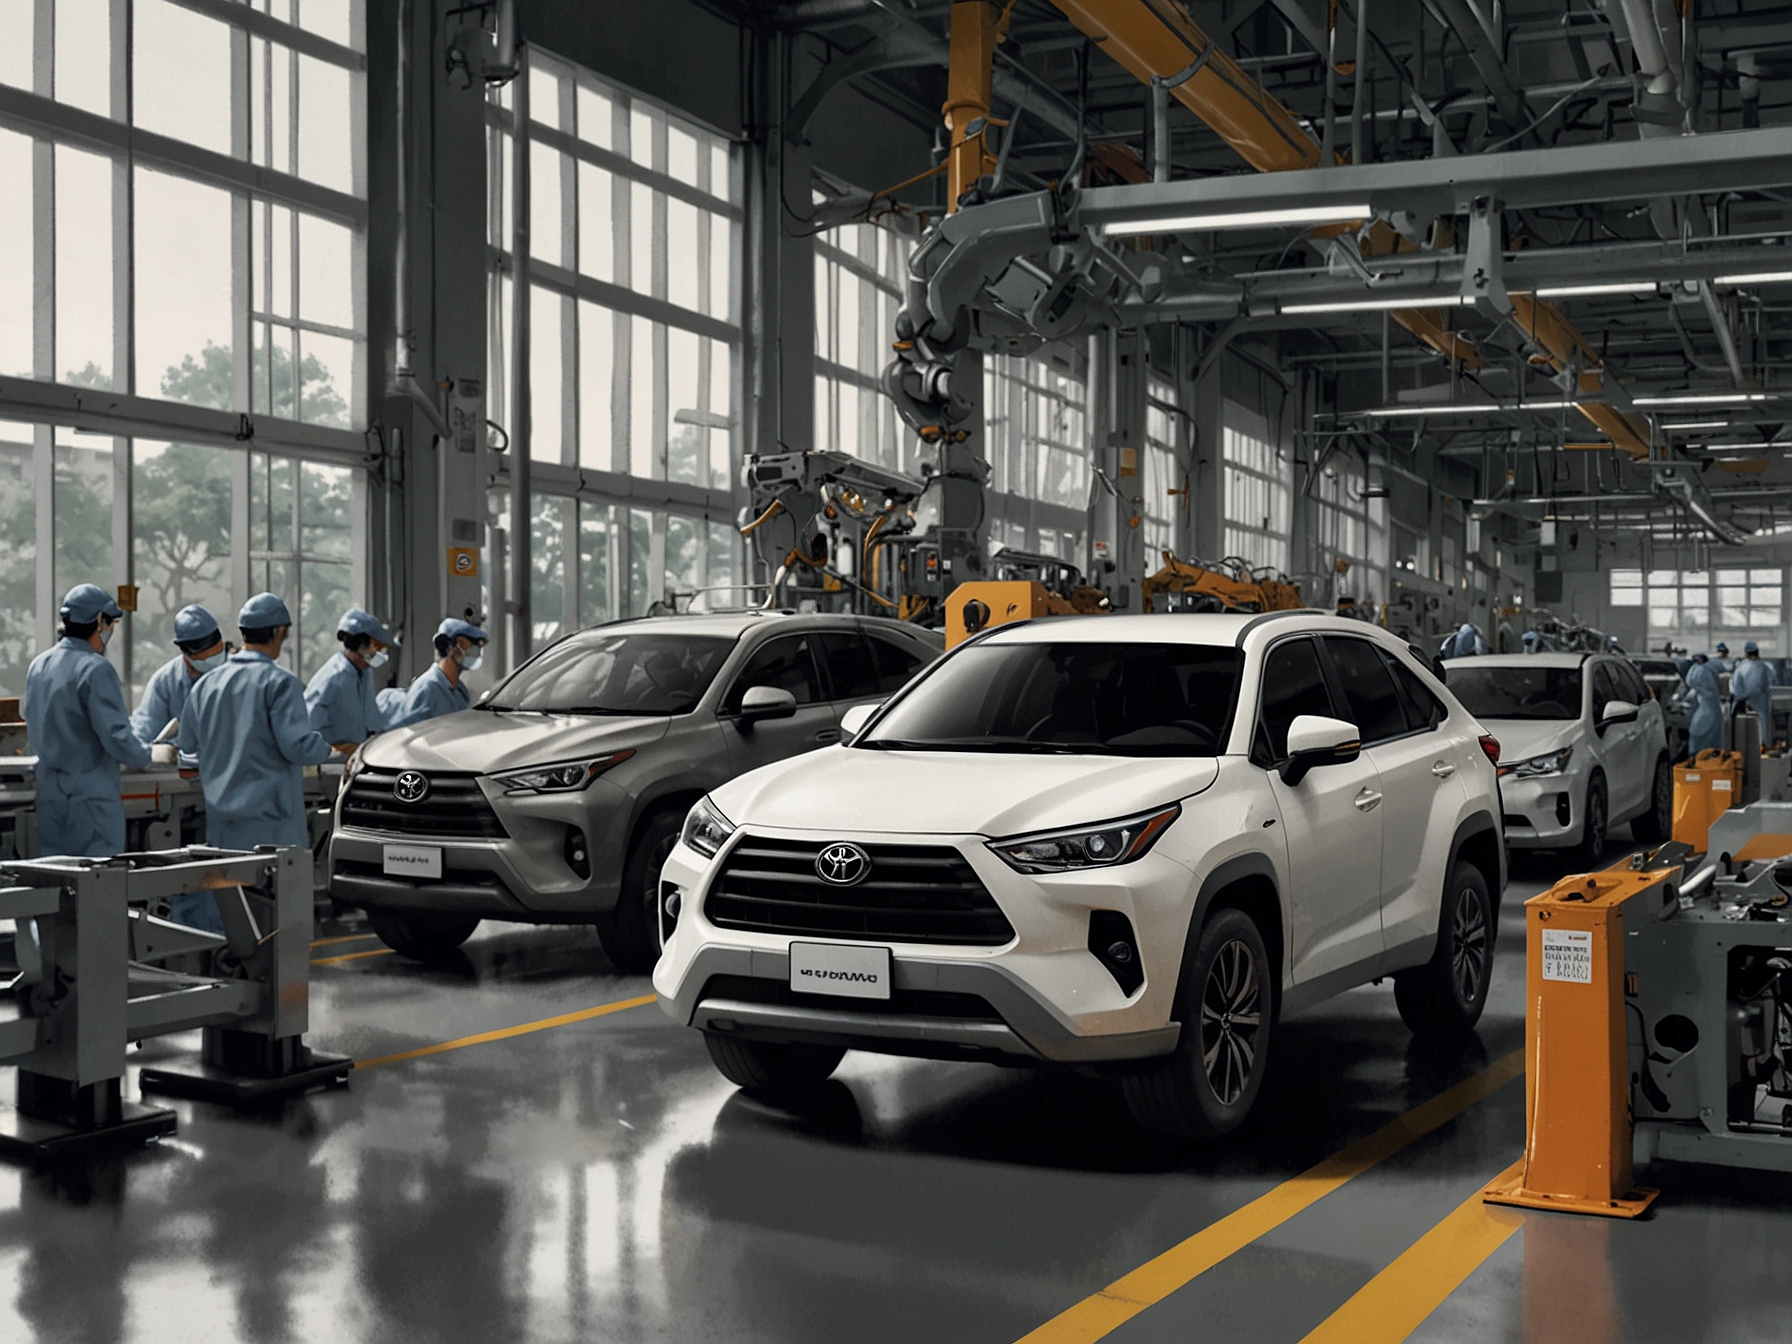 An image showing a Toyota factory production line halted, representing the impact of global semiconductor shortages on the company's operations and supply chain disruptions.